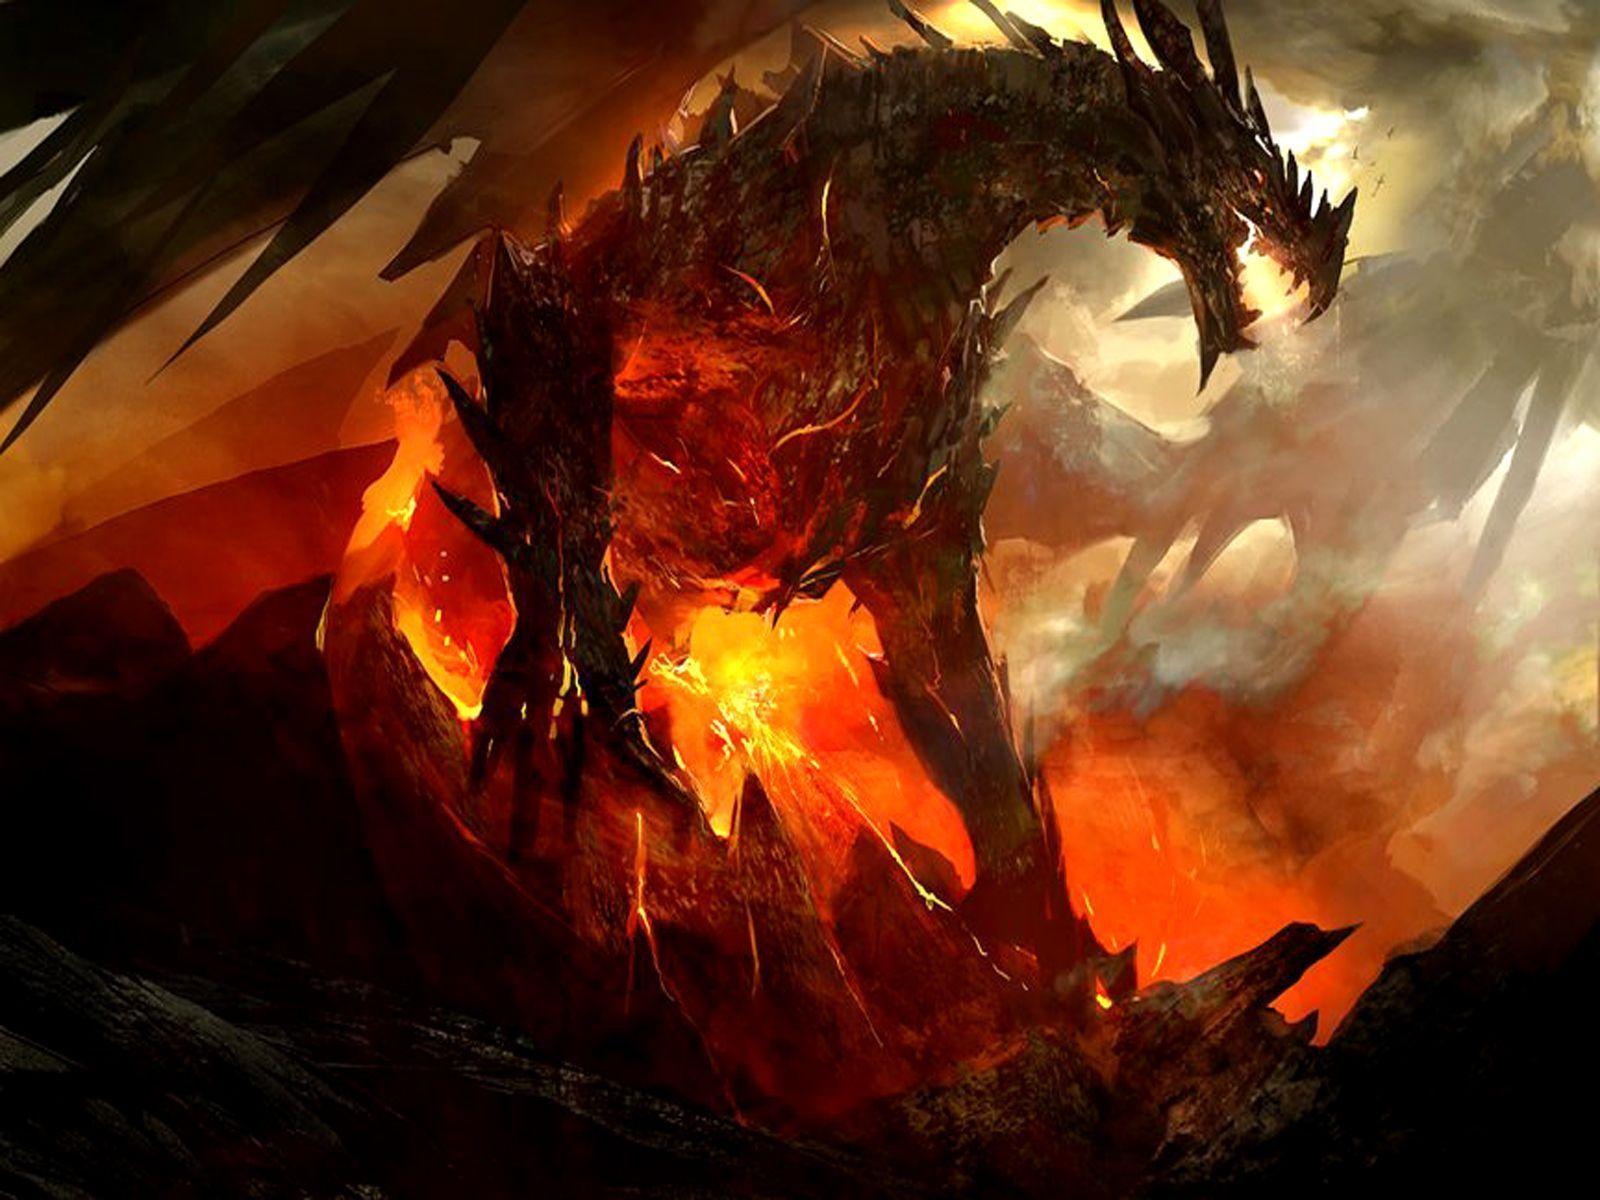 Burning Dragons Wallpaper, Image & Picture. Download HD